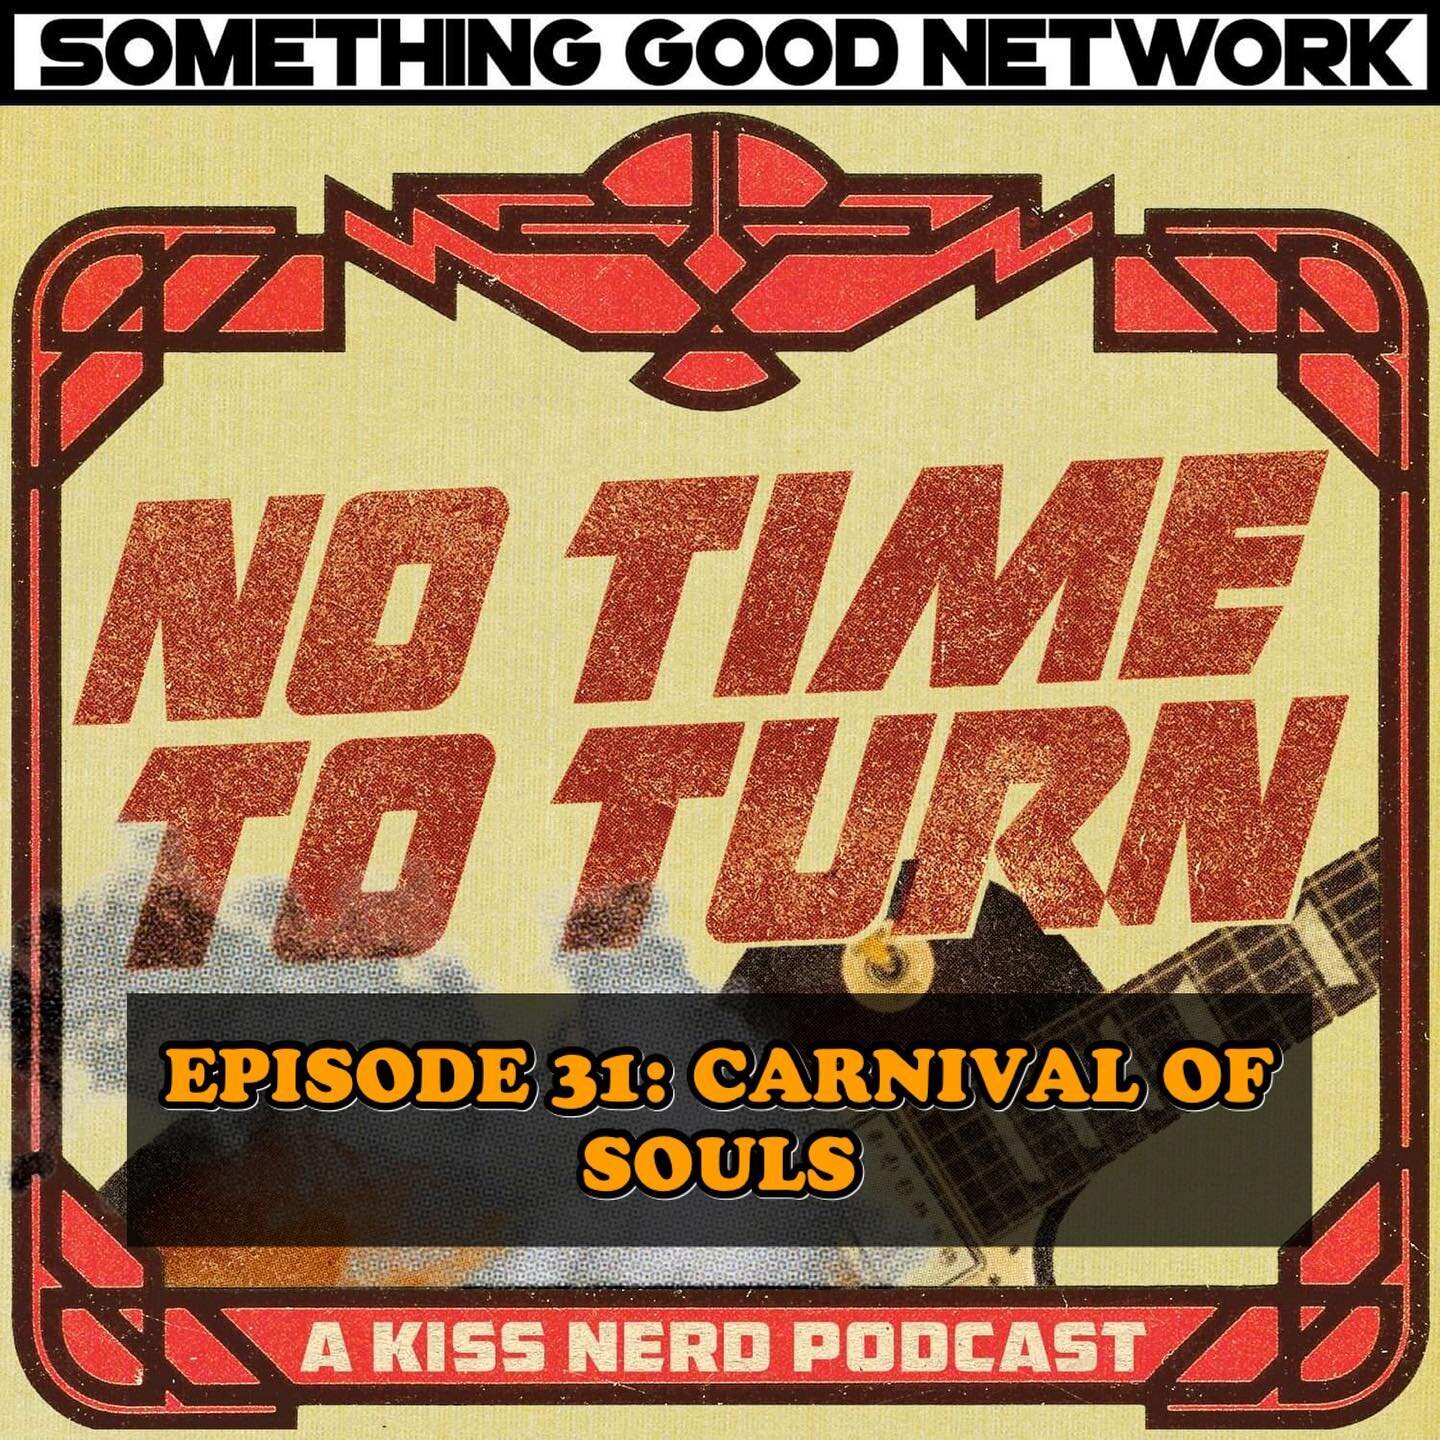 On Monday we released a new episode of ⚡️NO TIME TO TURN⚡️ click the link in the bio to take a listen! 💥
EPISODE 31: Carnival of Souls - Working overtime and under the radar, the band juggles what is and what should never be. There's nothing I can d